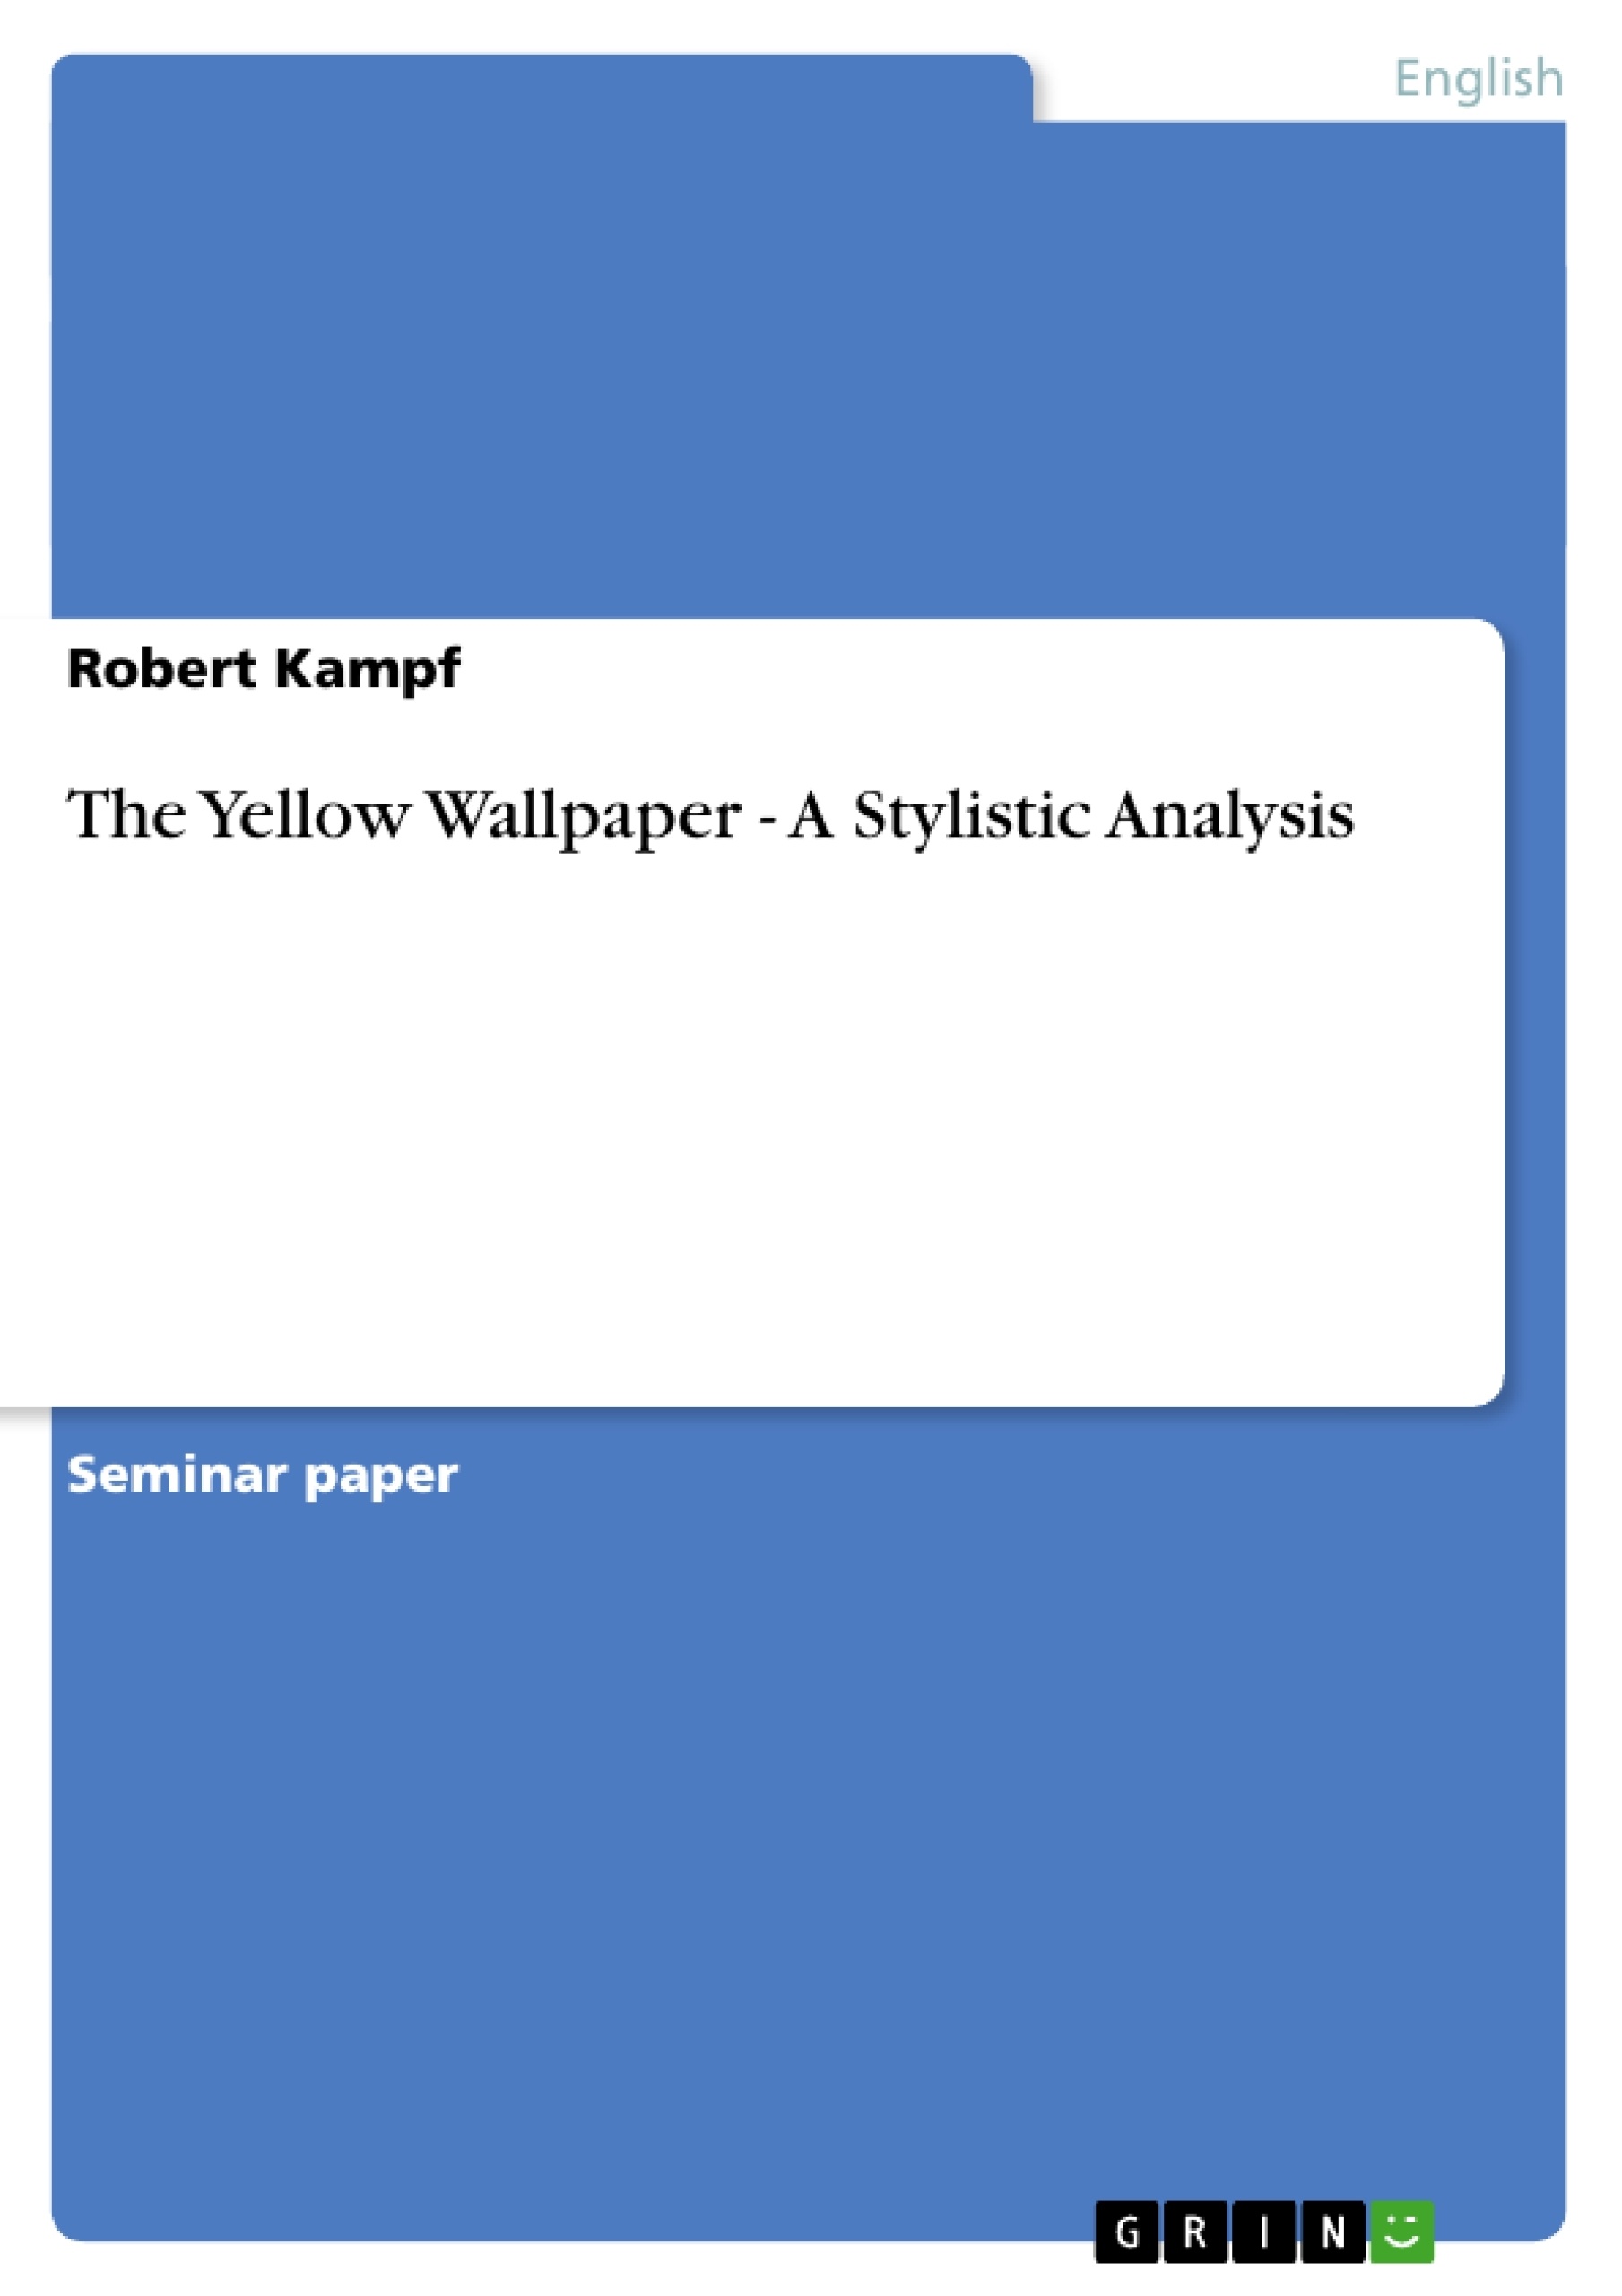 The Yellow Wallpaper   A Stylistic Analysis Self Publishing at GRIN